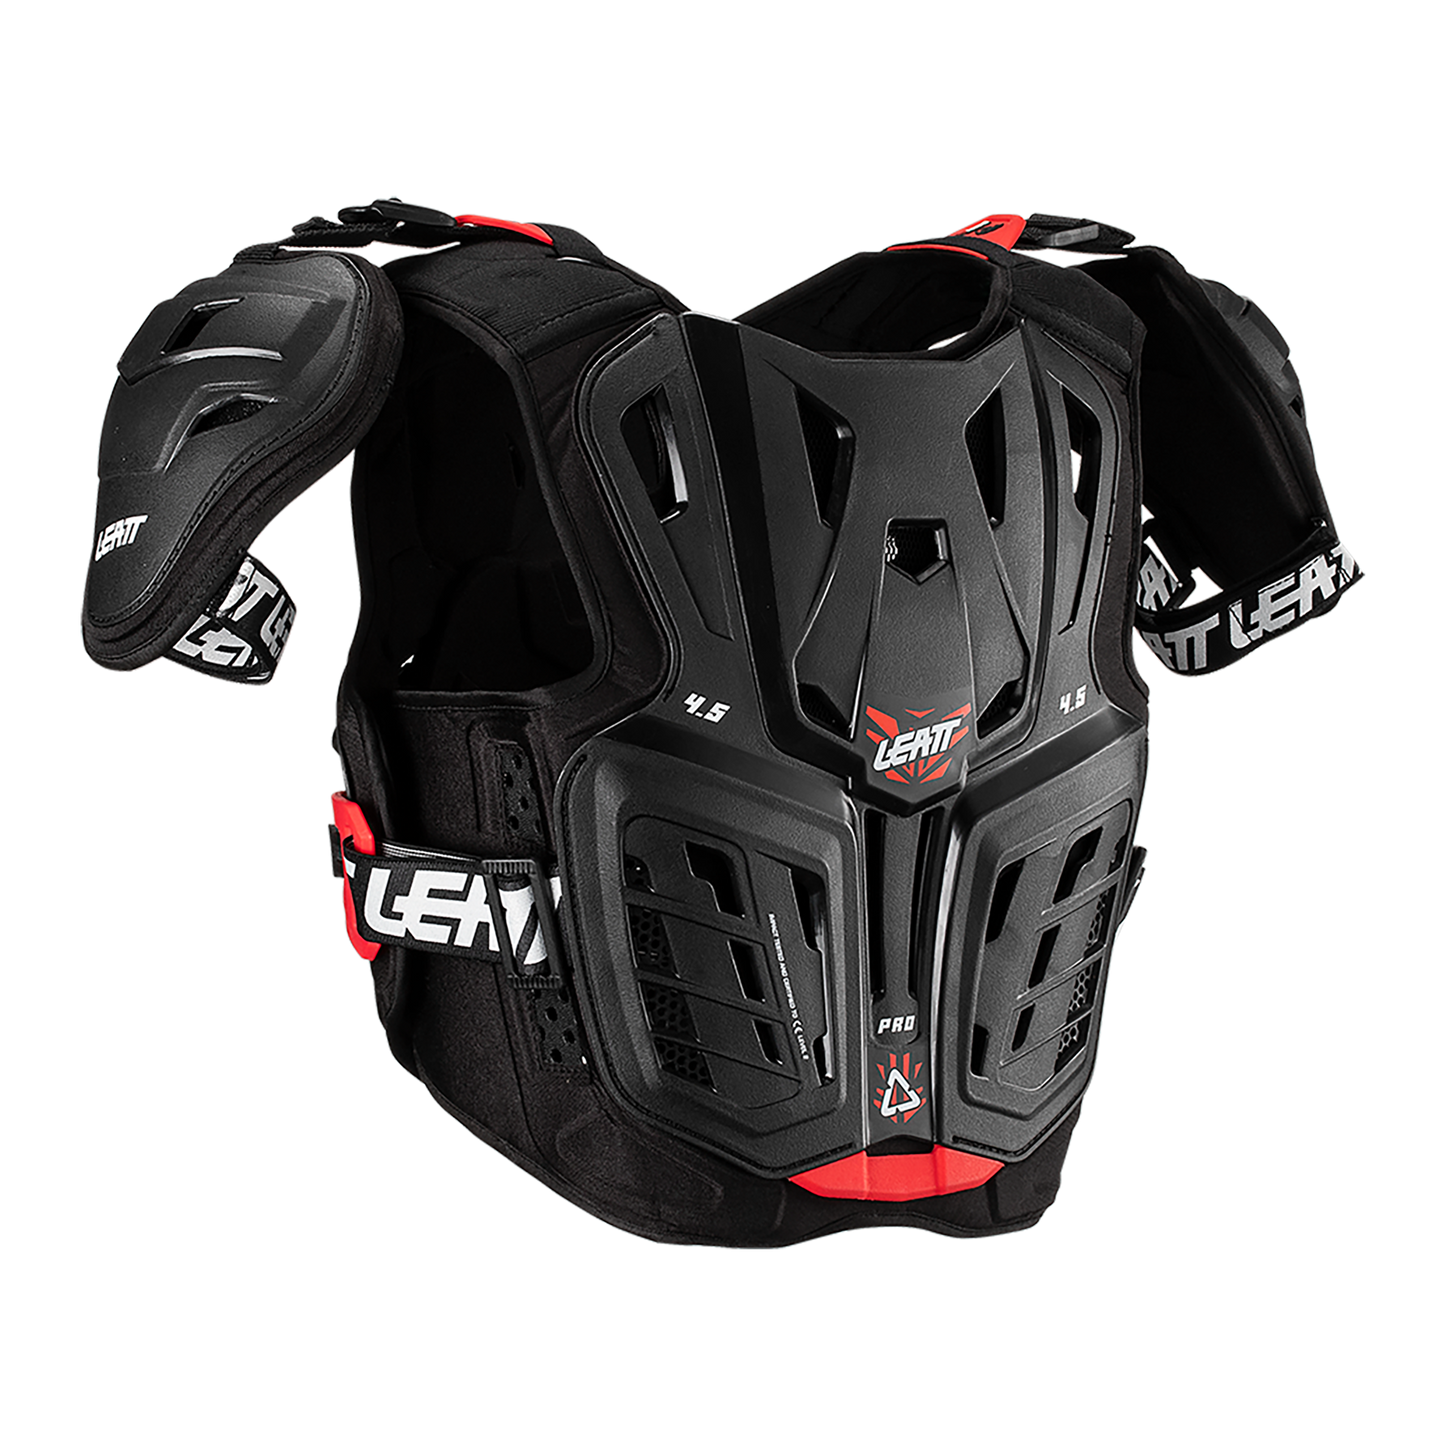 Body Protector 4.5 Pro - Black - Red